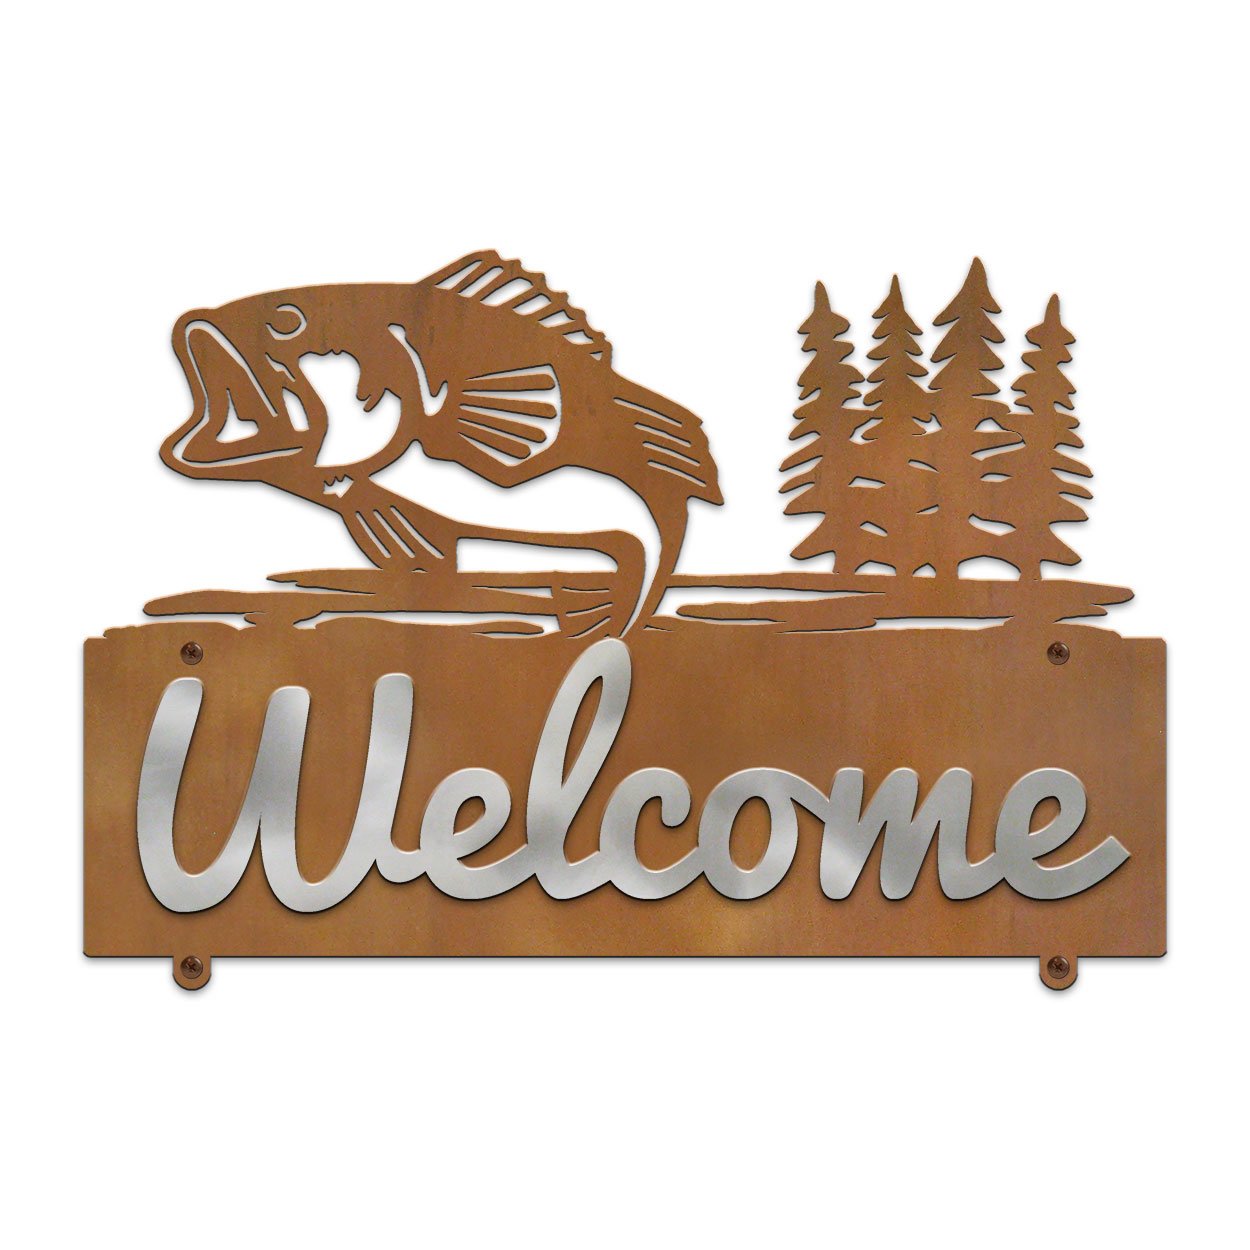 607018 - Jumping Bass with Trees Design Horizontal Metal Welcome Wall Plaque